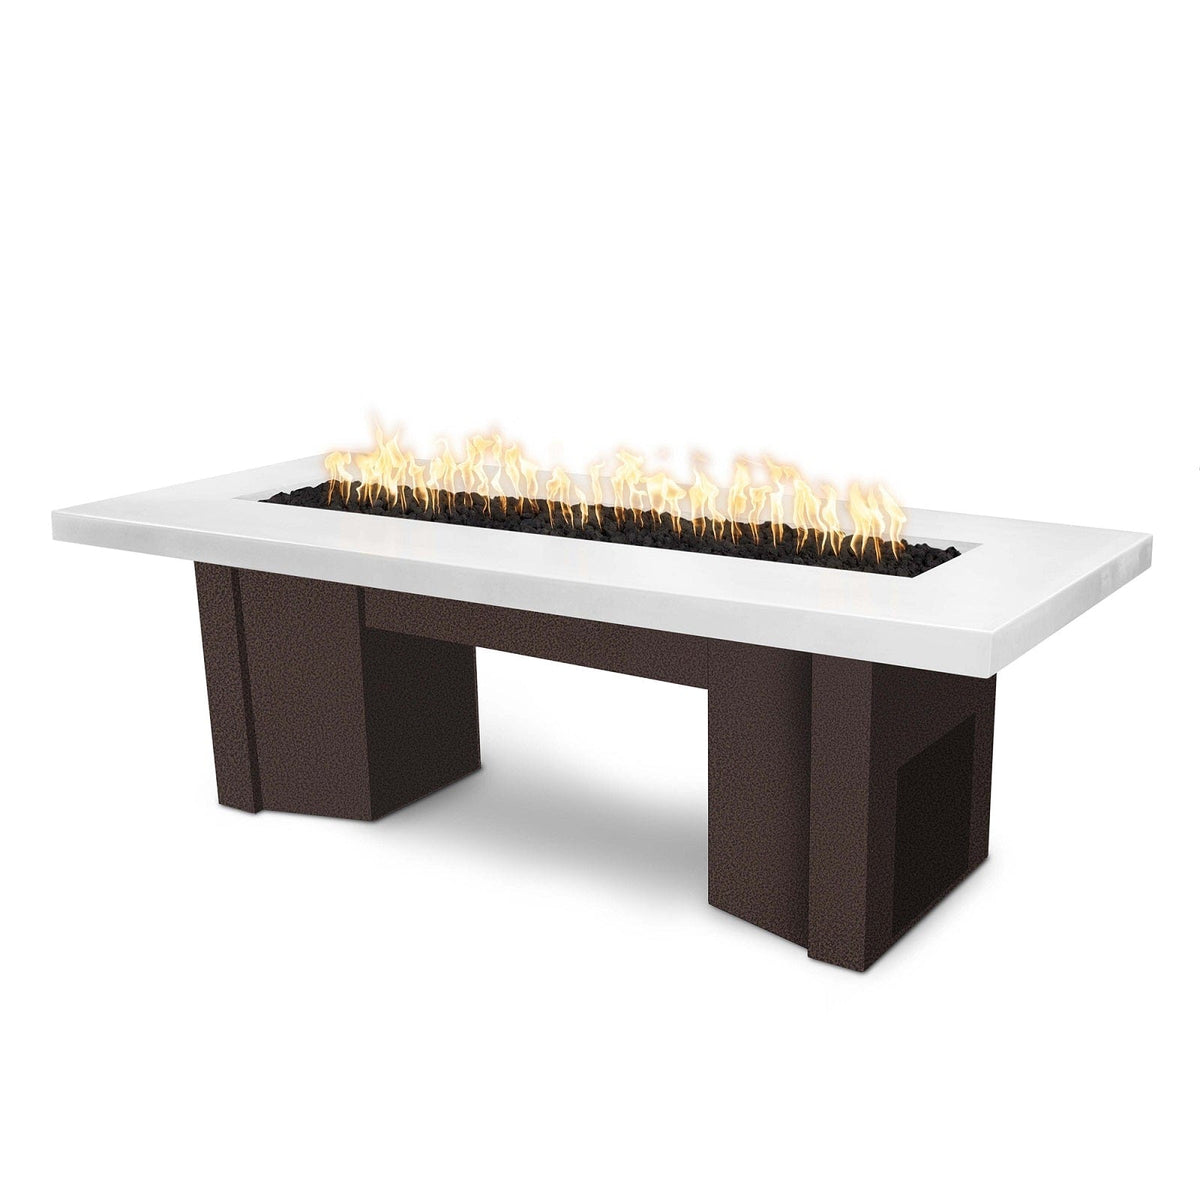 The Outdoor Plus Fire Features Limestone (-LIM) / Copper Vein Powder Coated Steel (-CPV) The Outdoor Plus 78&quot; Alameda Fire Table Smooth Concrete in Liquid Propane - 12V Electronic Ignition / OPT-ALMGFRC78E12V-LP